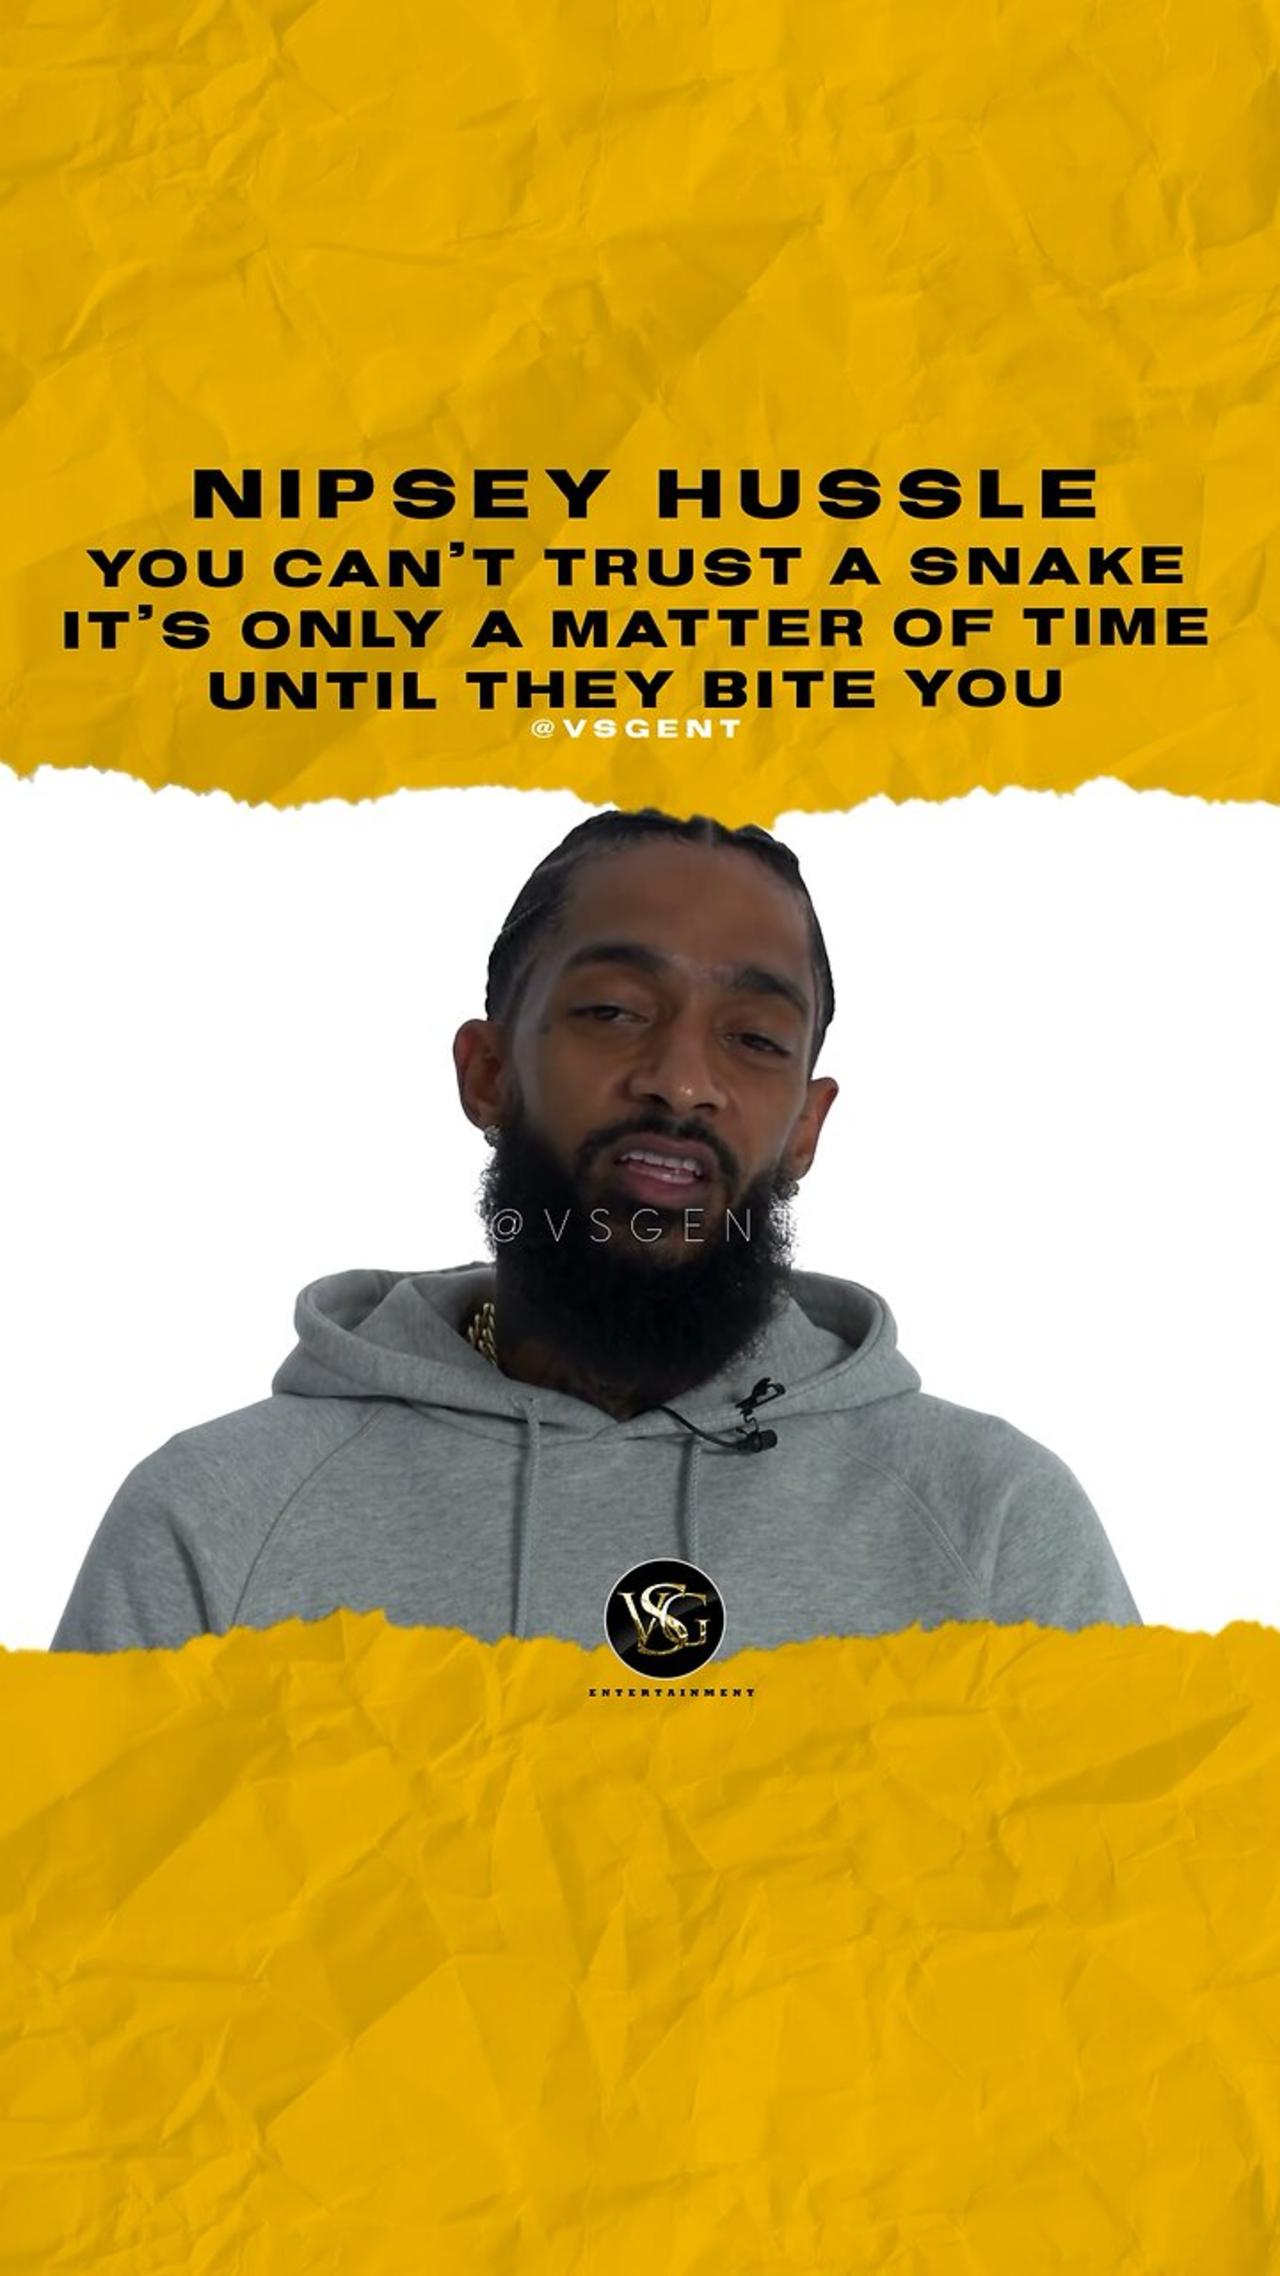 You can’t trust a 🐍! It’s only a matter of time until they bite you.